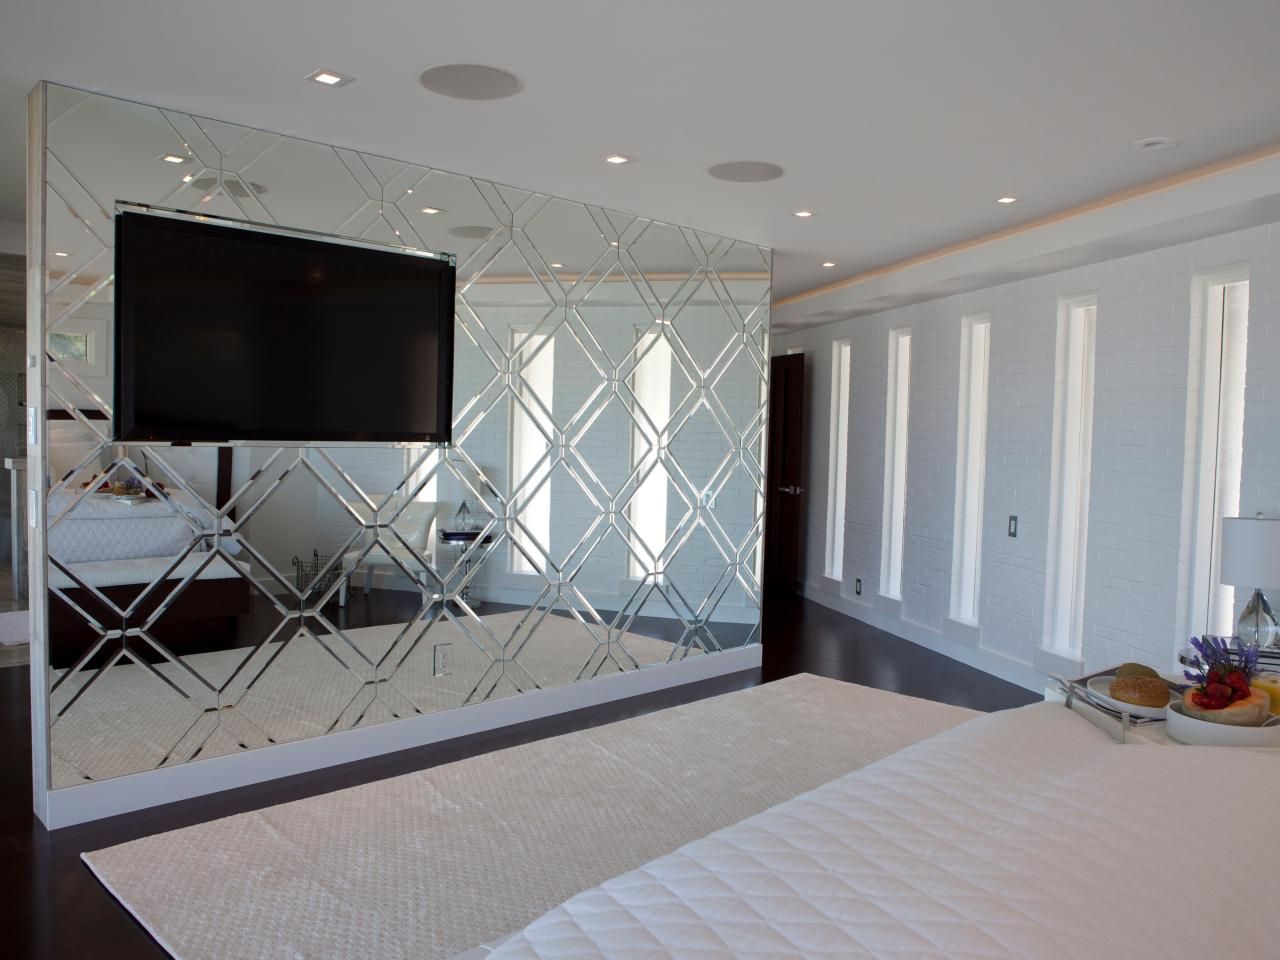 Famous Bedroom Wall Mirror Houzz Design Ideas Bathroom Mirrors Simple Pertaining To Large Wall Mirrors For Bedroom (View 2 of 20)